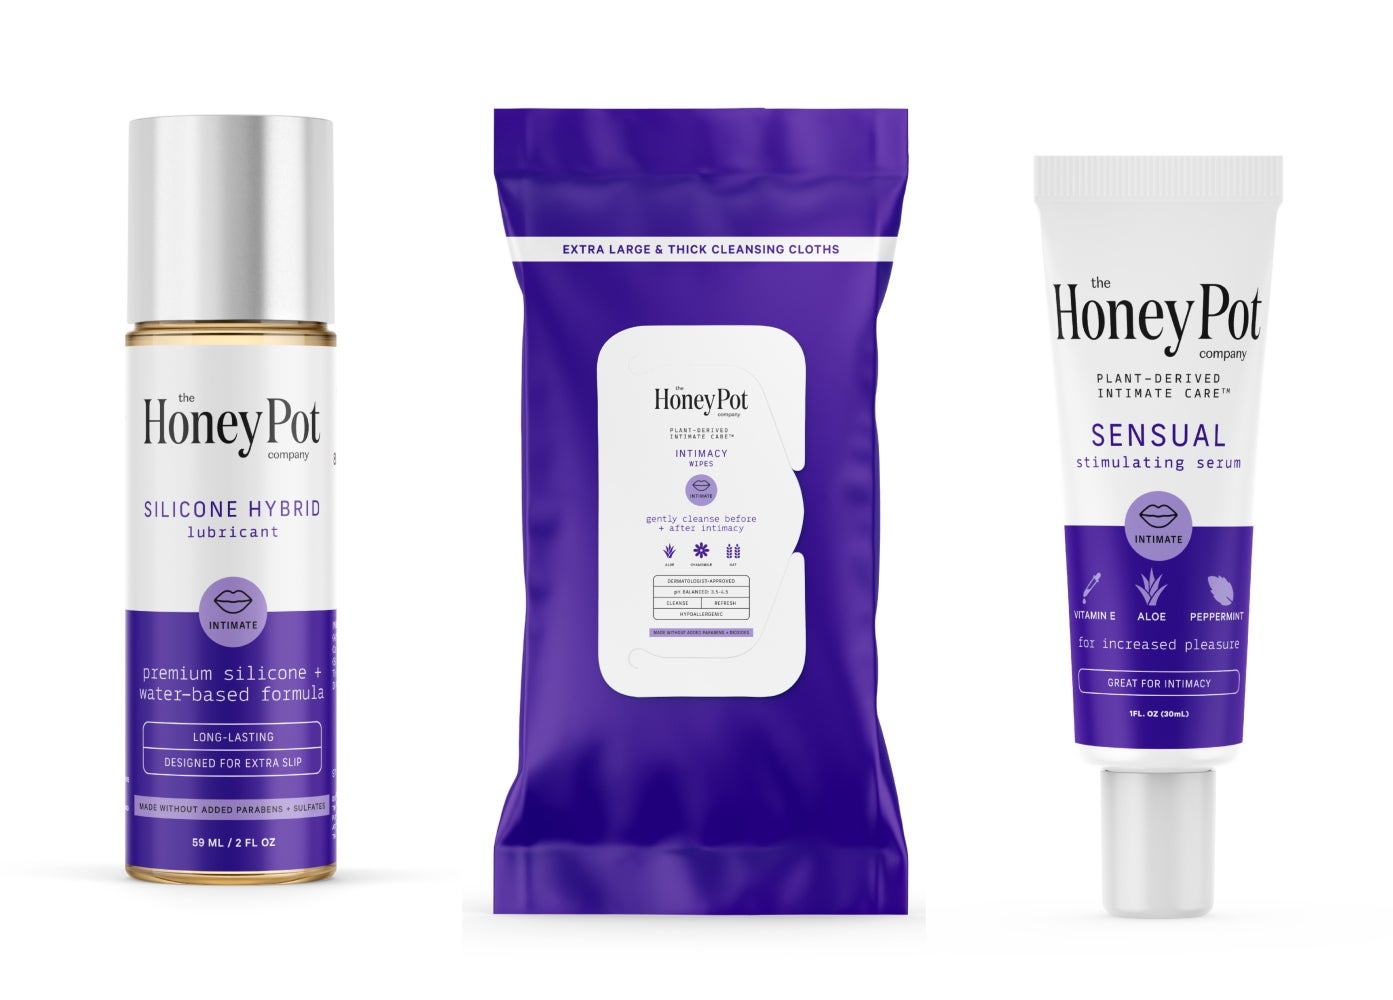 First Look The Honey Pot Enters The Sexual Wellness Space With New Line Of Products Essence